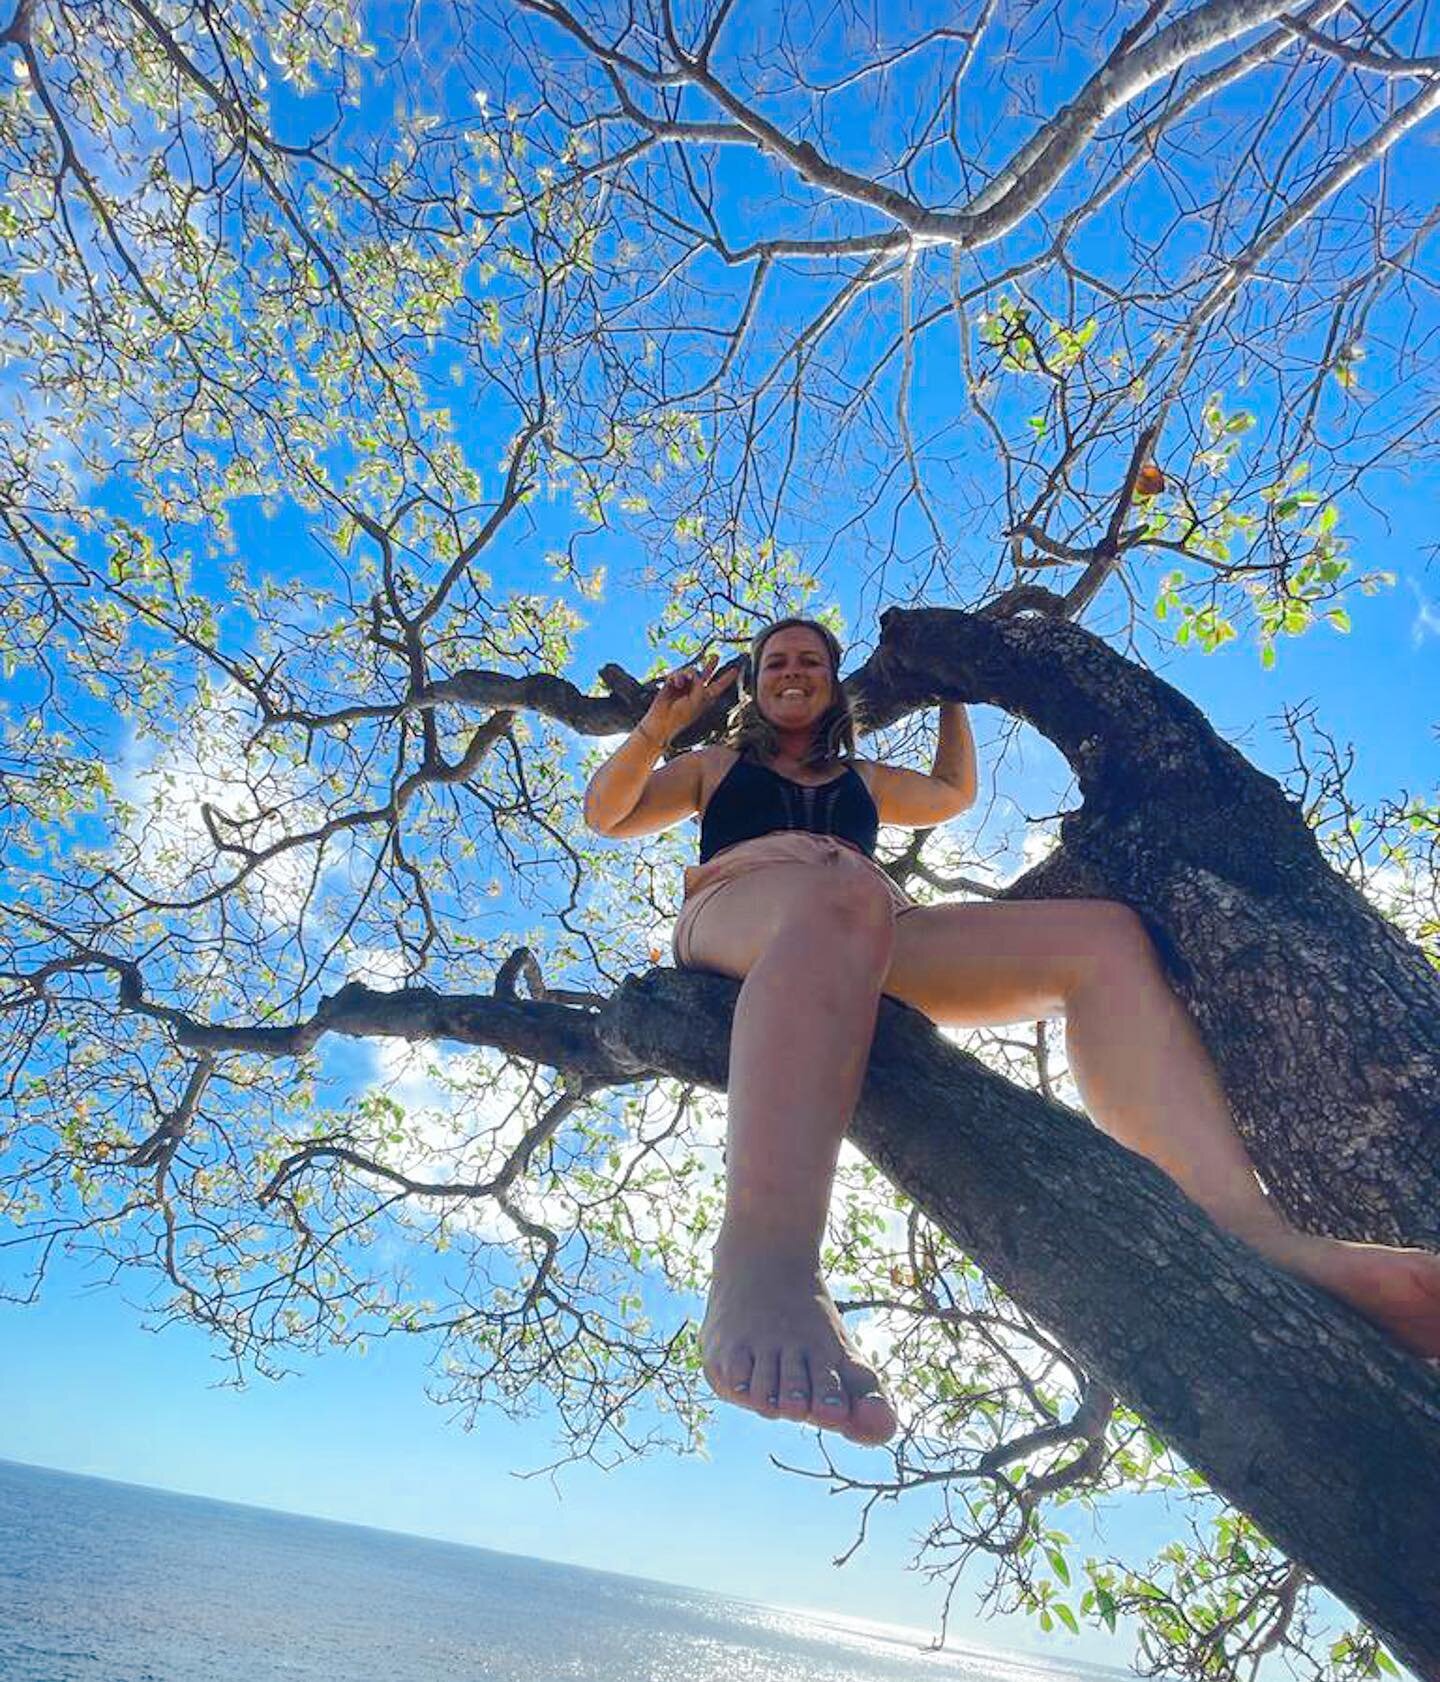 I had a flight to go home yesterday but ended up climbing this tree over the ocean instead :)

Costa Rica always has a weird way of keeping me here when I&rsquo;m not ready to leave or literally pushing me out when it&rsquo;s my time to go. I realize